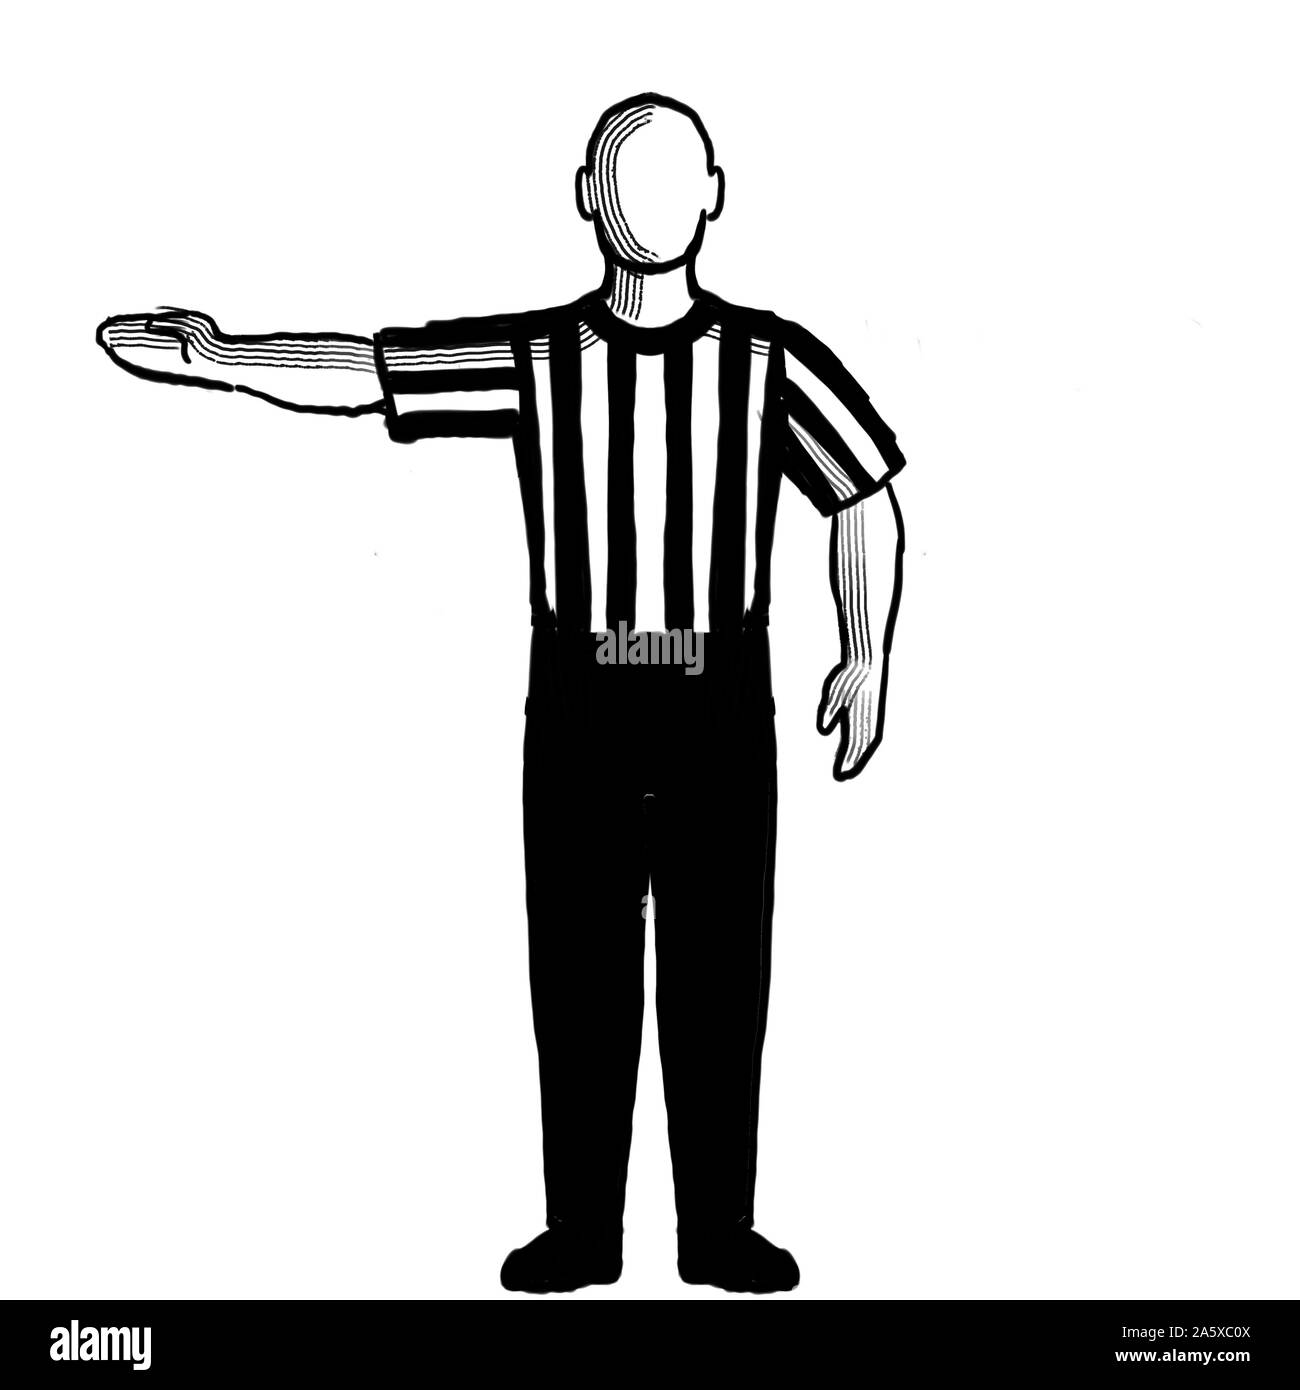 Black and white illustration showing a basketball referee or official with hand signal of delayed lane violation viewed from front on isolated backgro Stock Photo